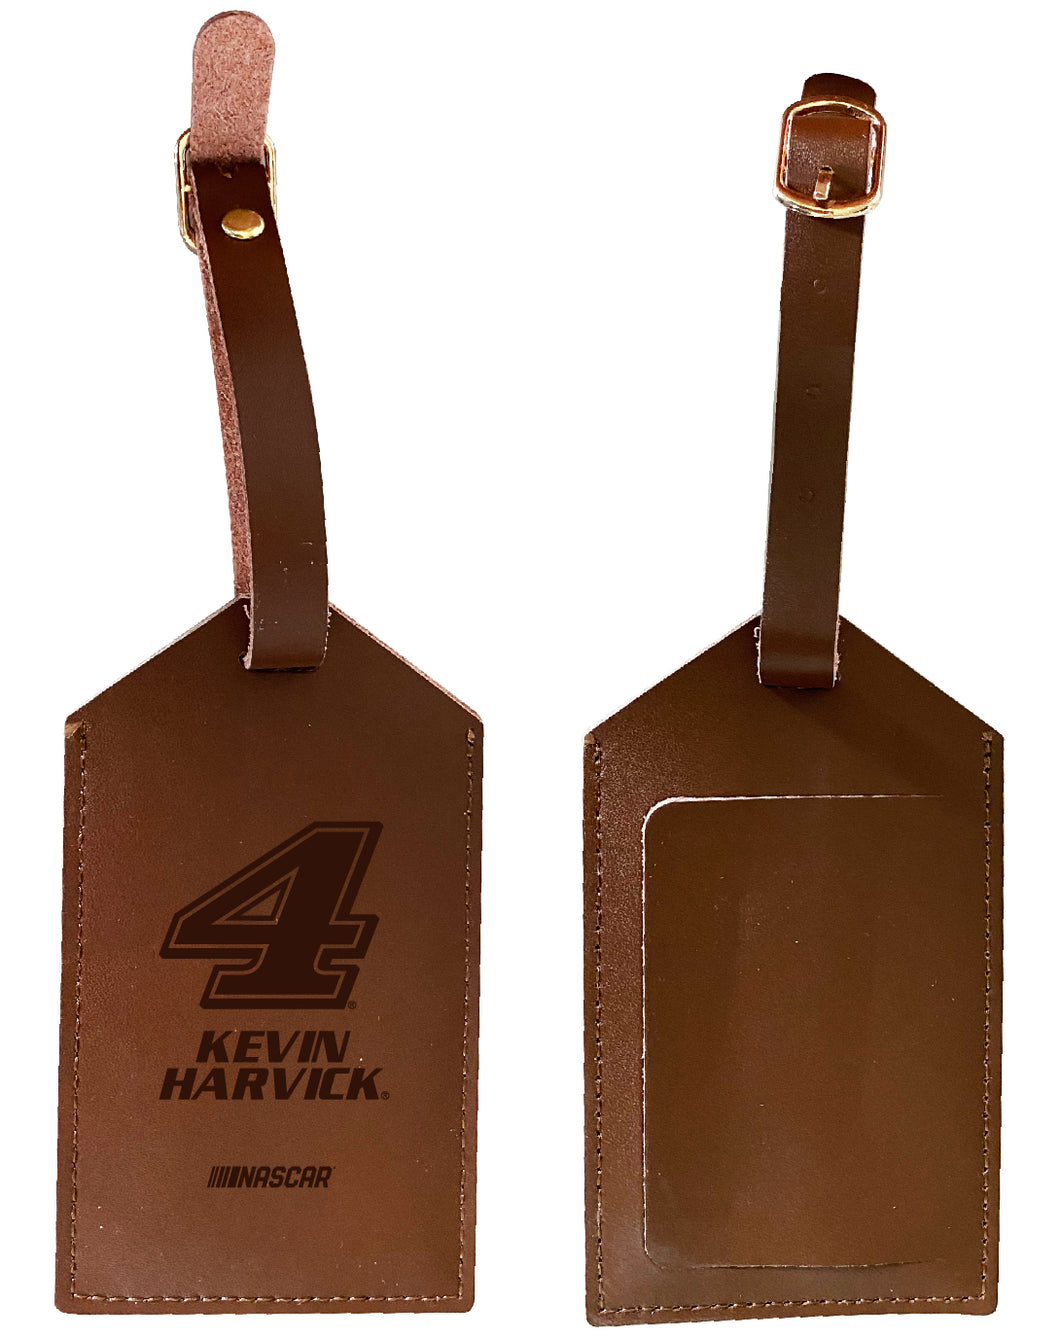 Nascar #4 Kevin Harvick Leather Luggage Tag Engraved